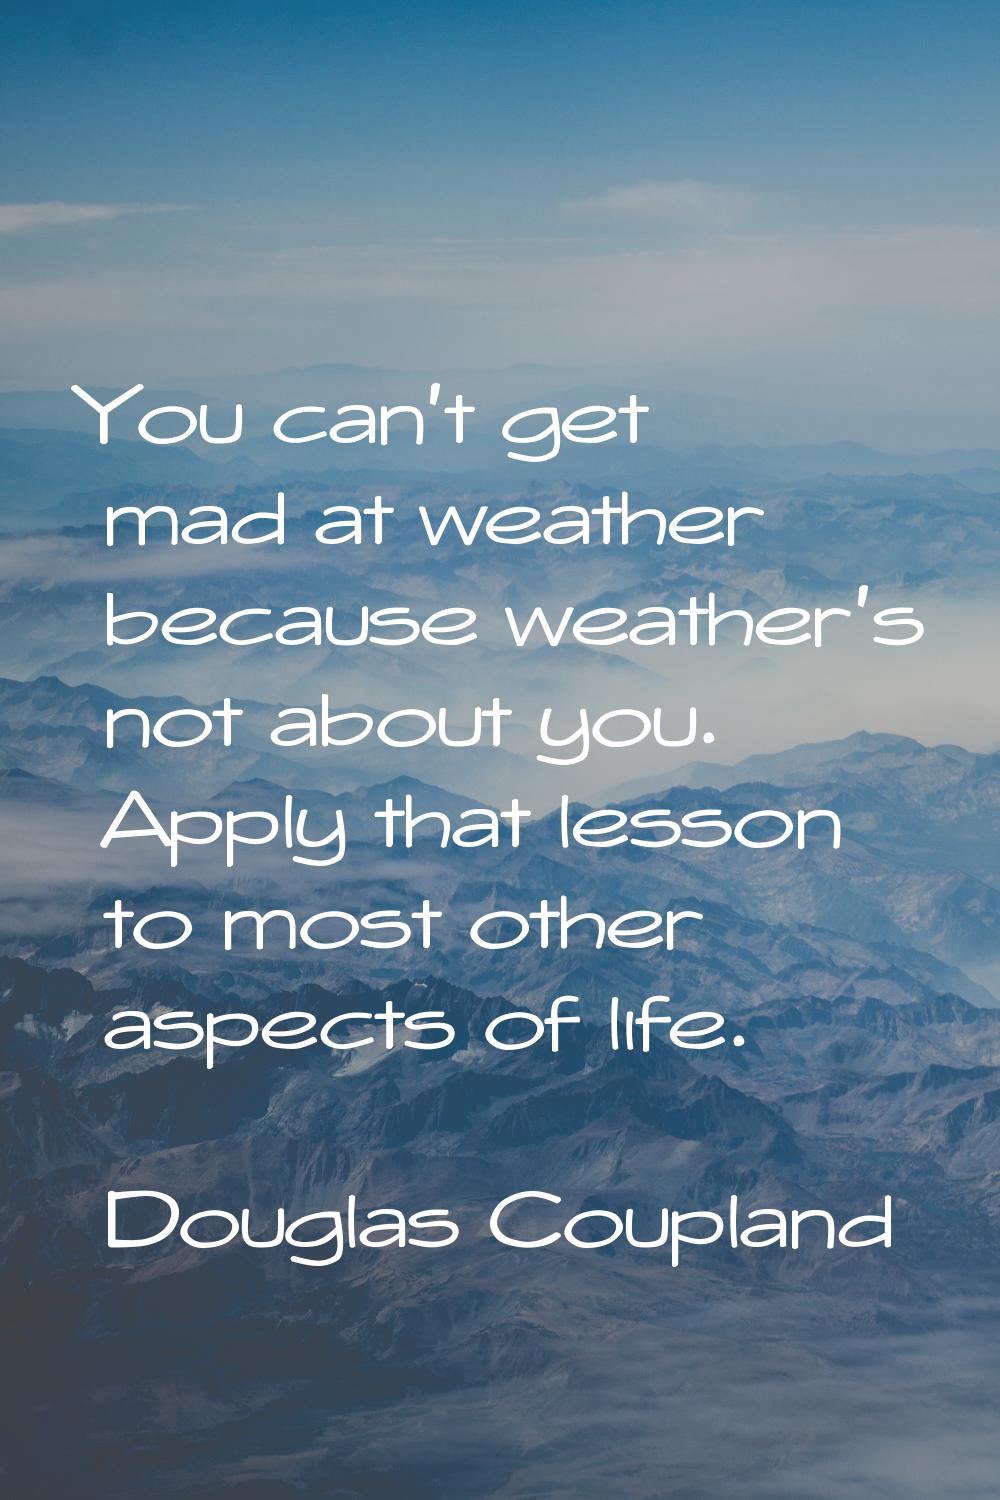 You can't get mad at weather because weather's not about you. Apply that lesson to most other aspec